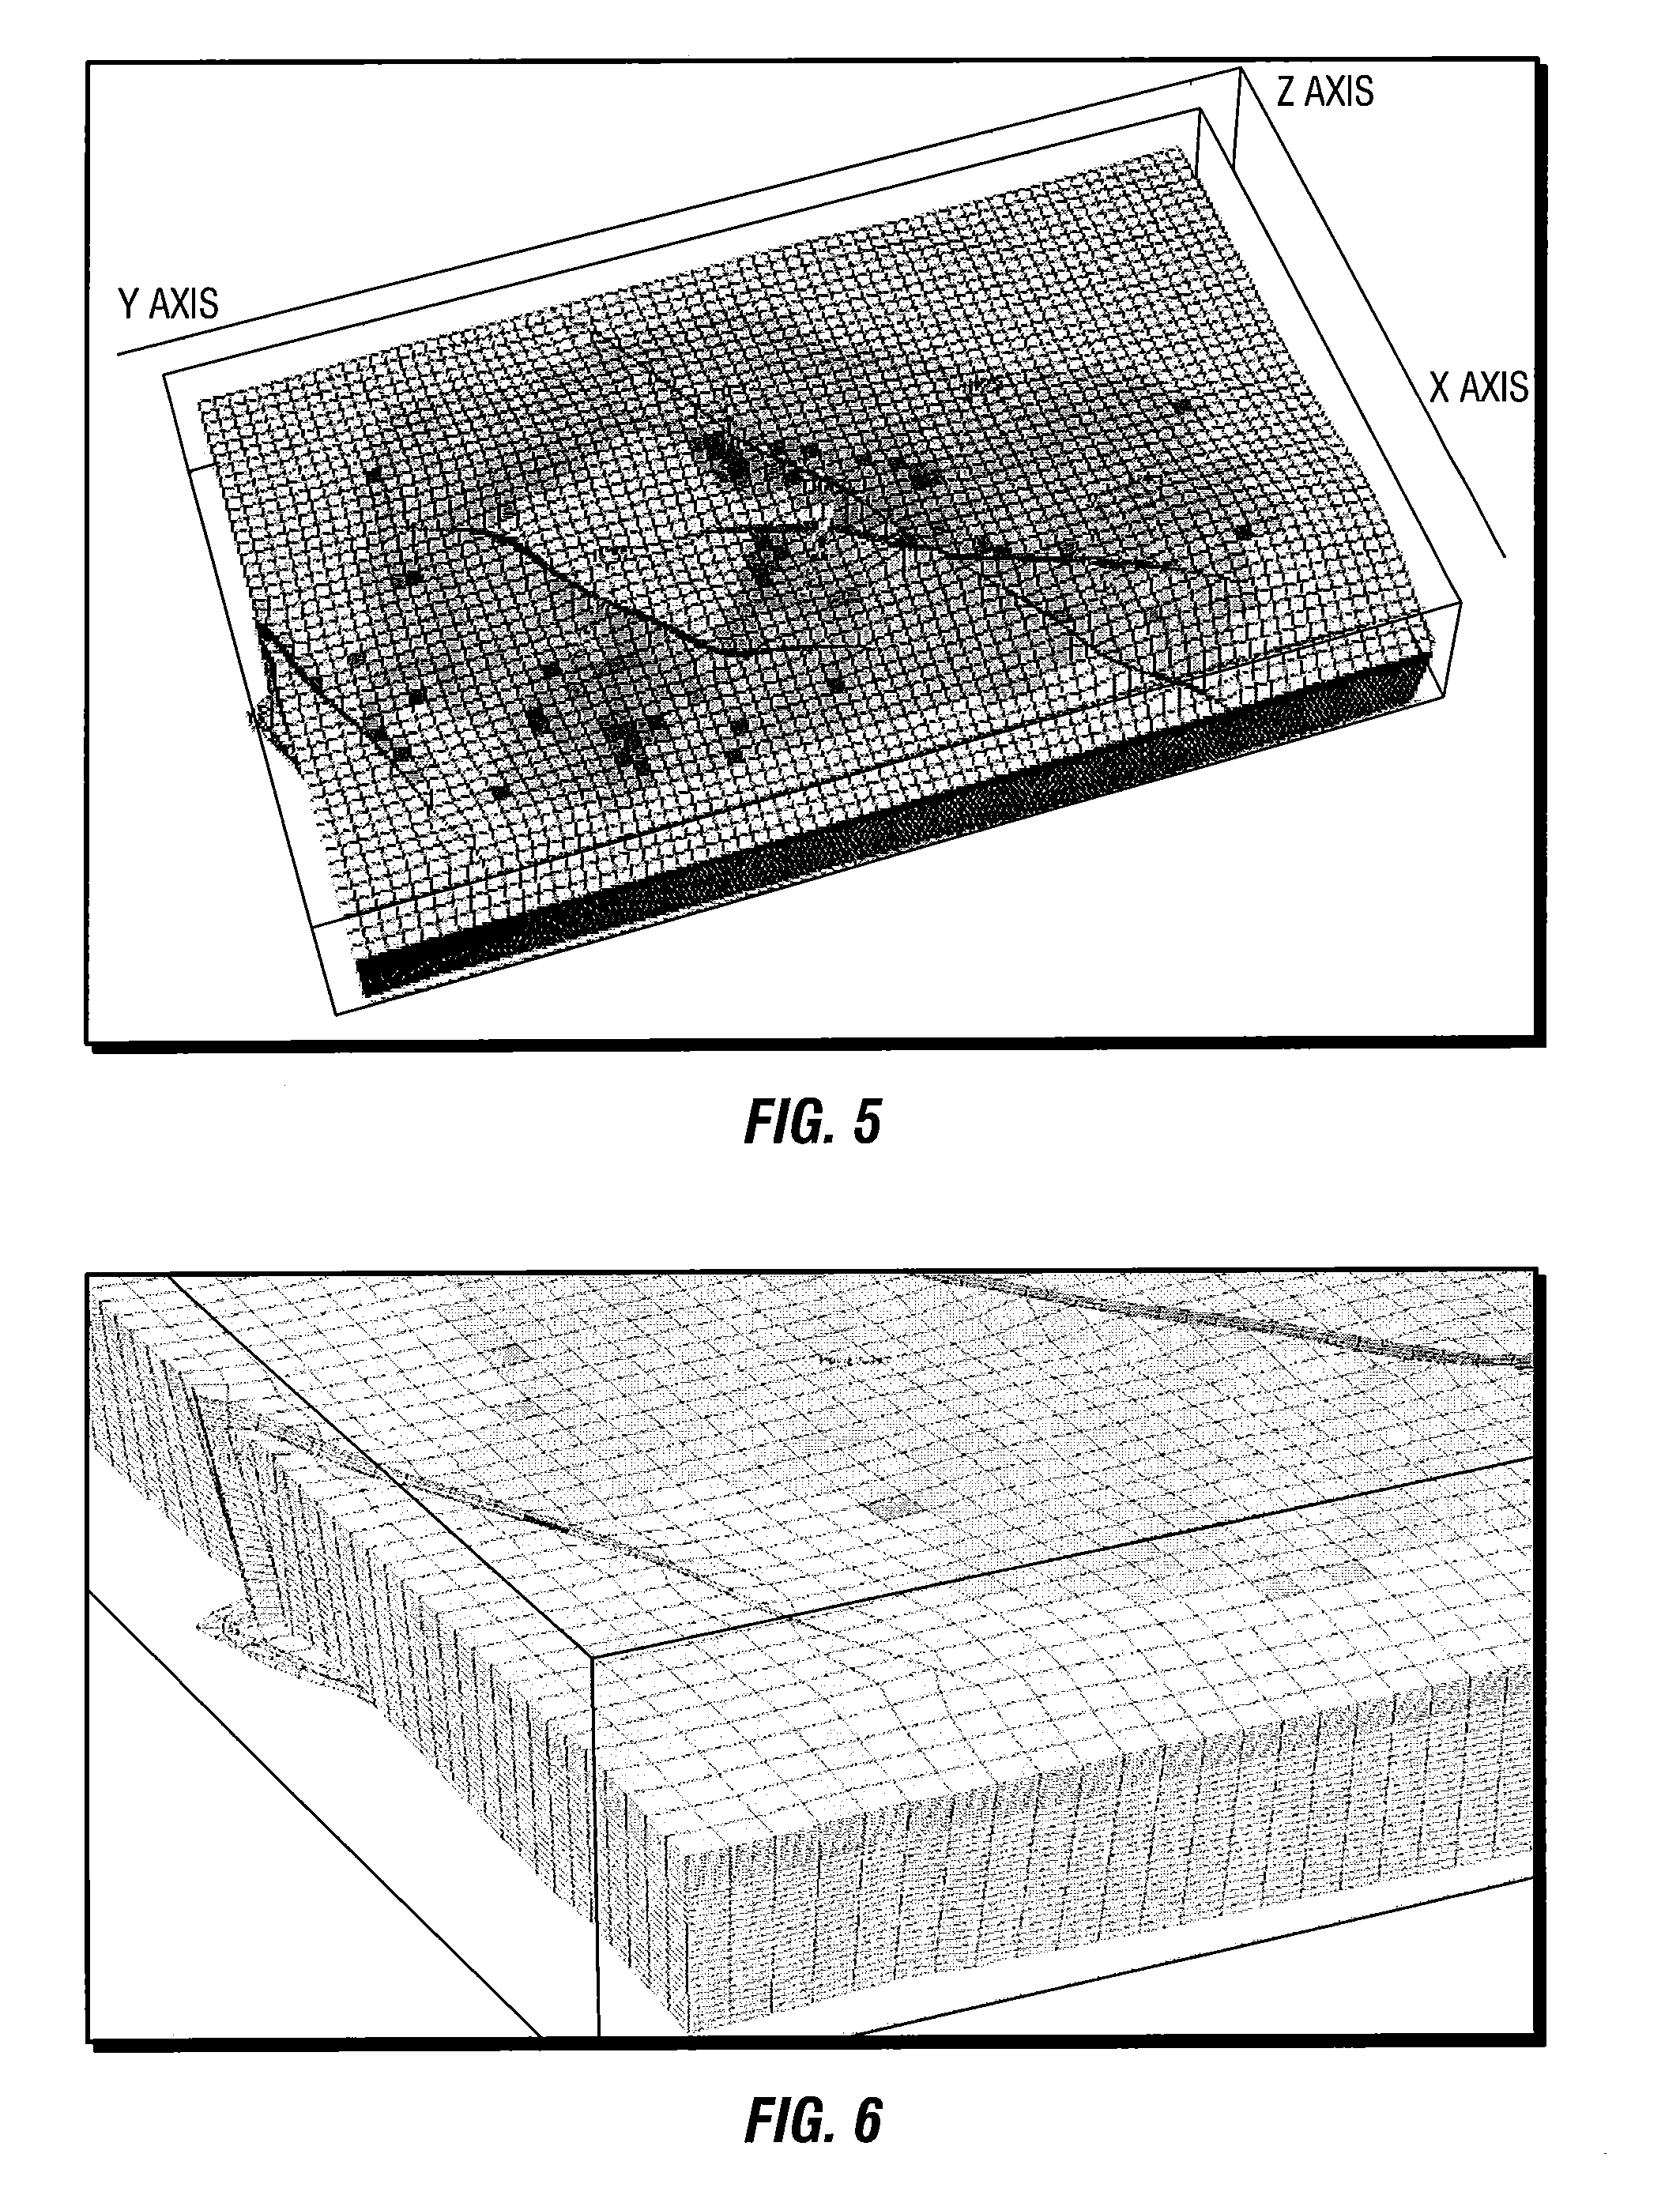 Efficient data mapping technique for simulation coupling using least squares finite element method